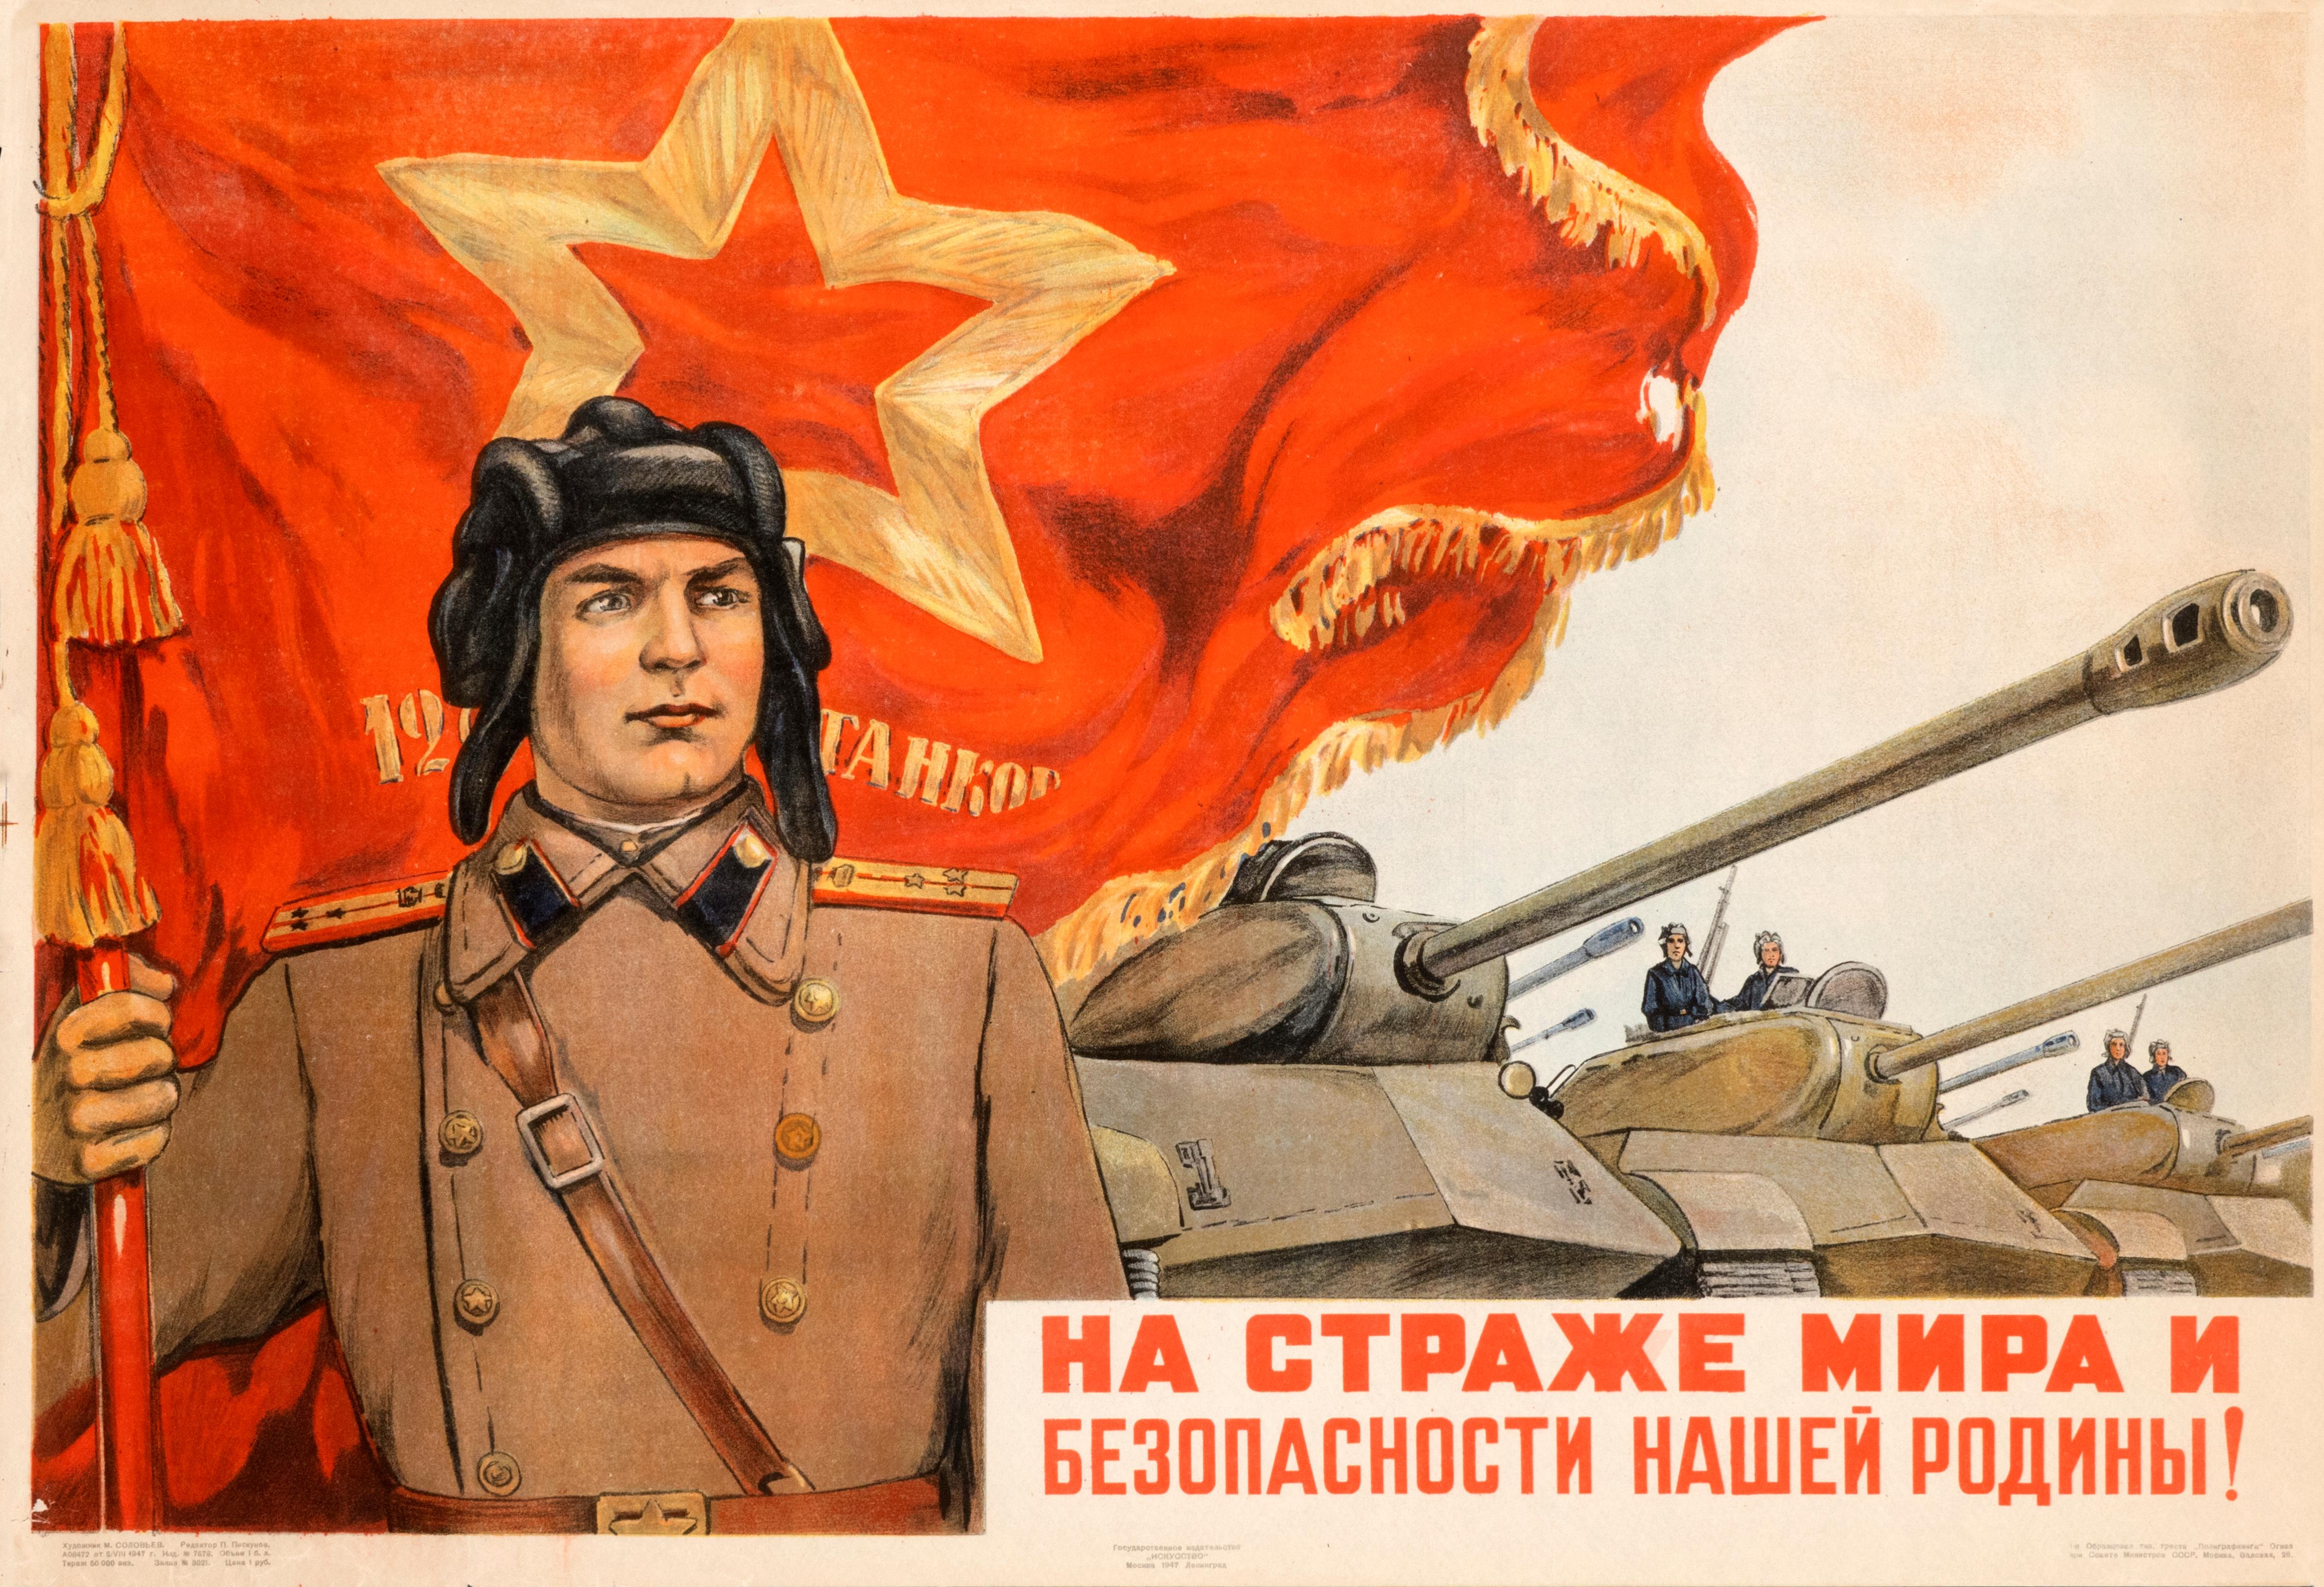 M. Solov'ev Figurative Print - "Guarding the Peace and Safety of Our Motherland" 1947 Soviet Propaganda Poster